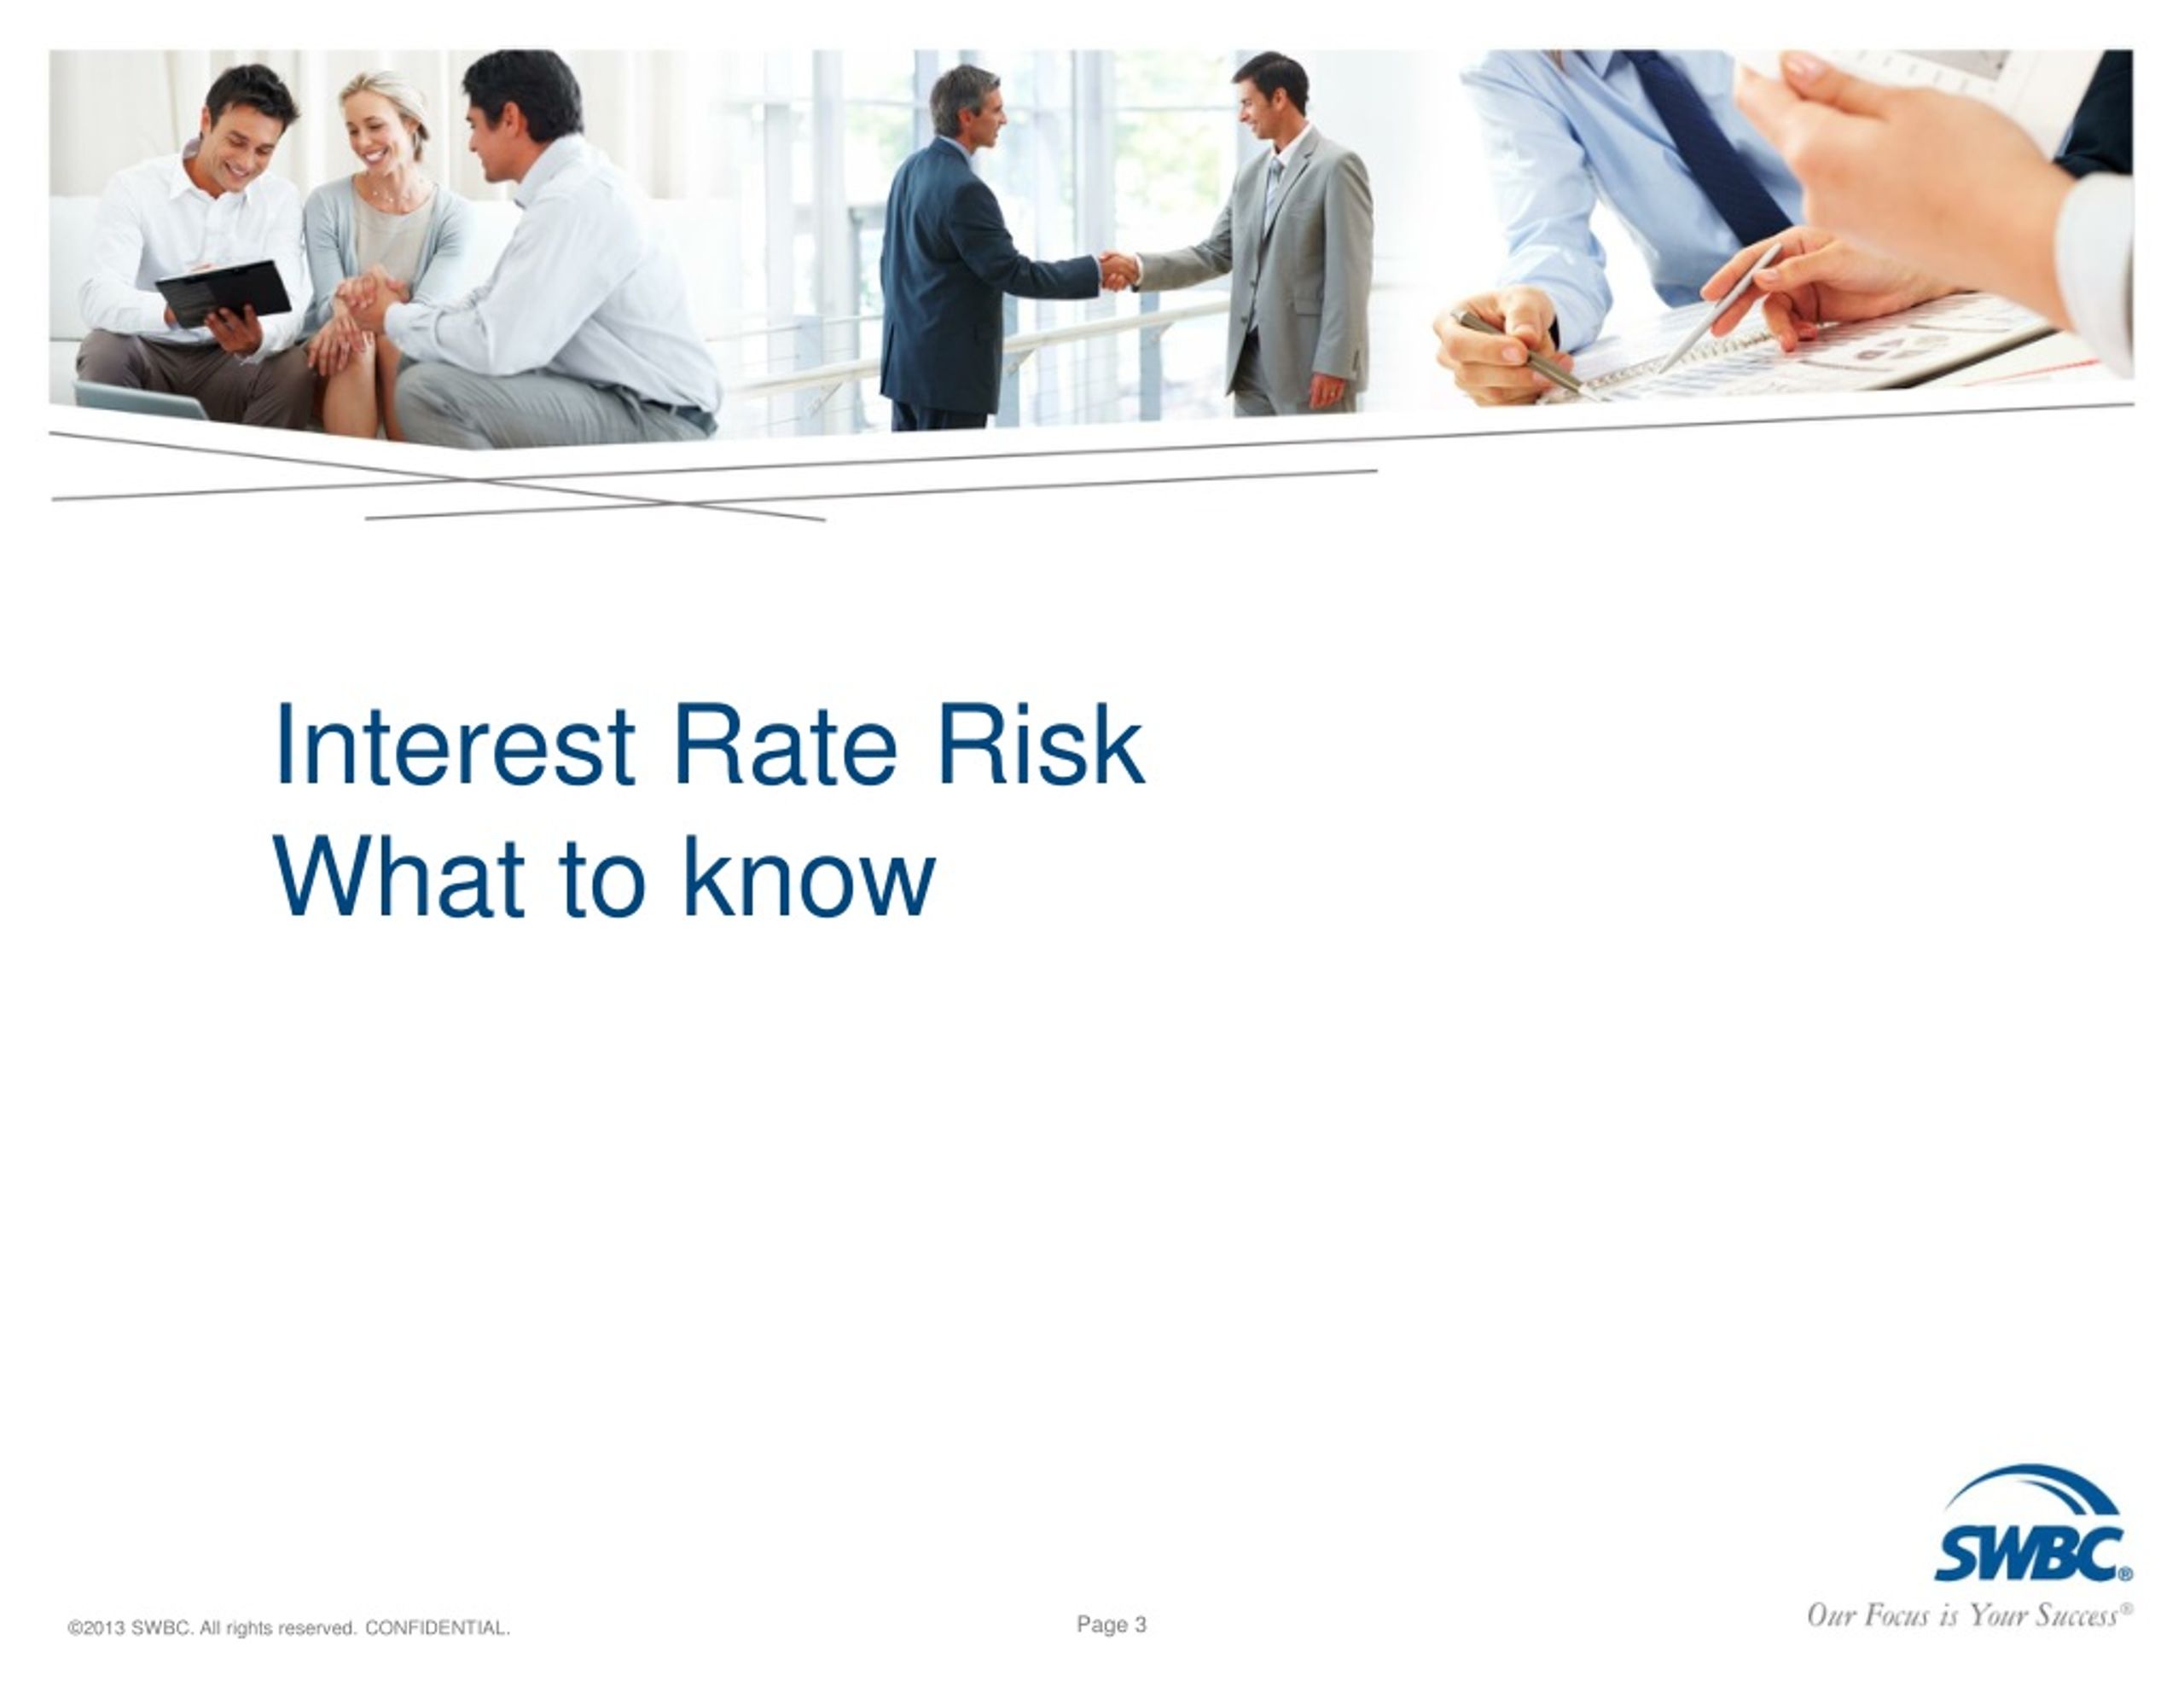 Ppt Interest Rate Risk Powerpoint Presentation Free Download Id1206572 3366